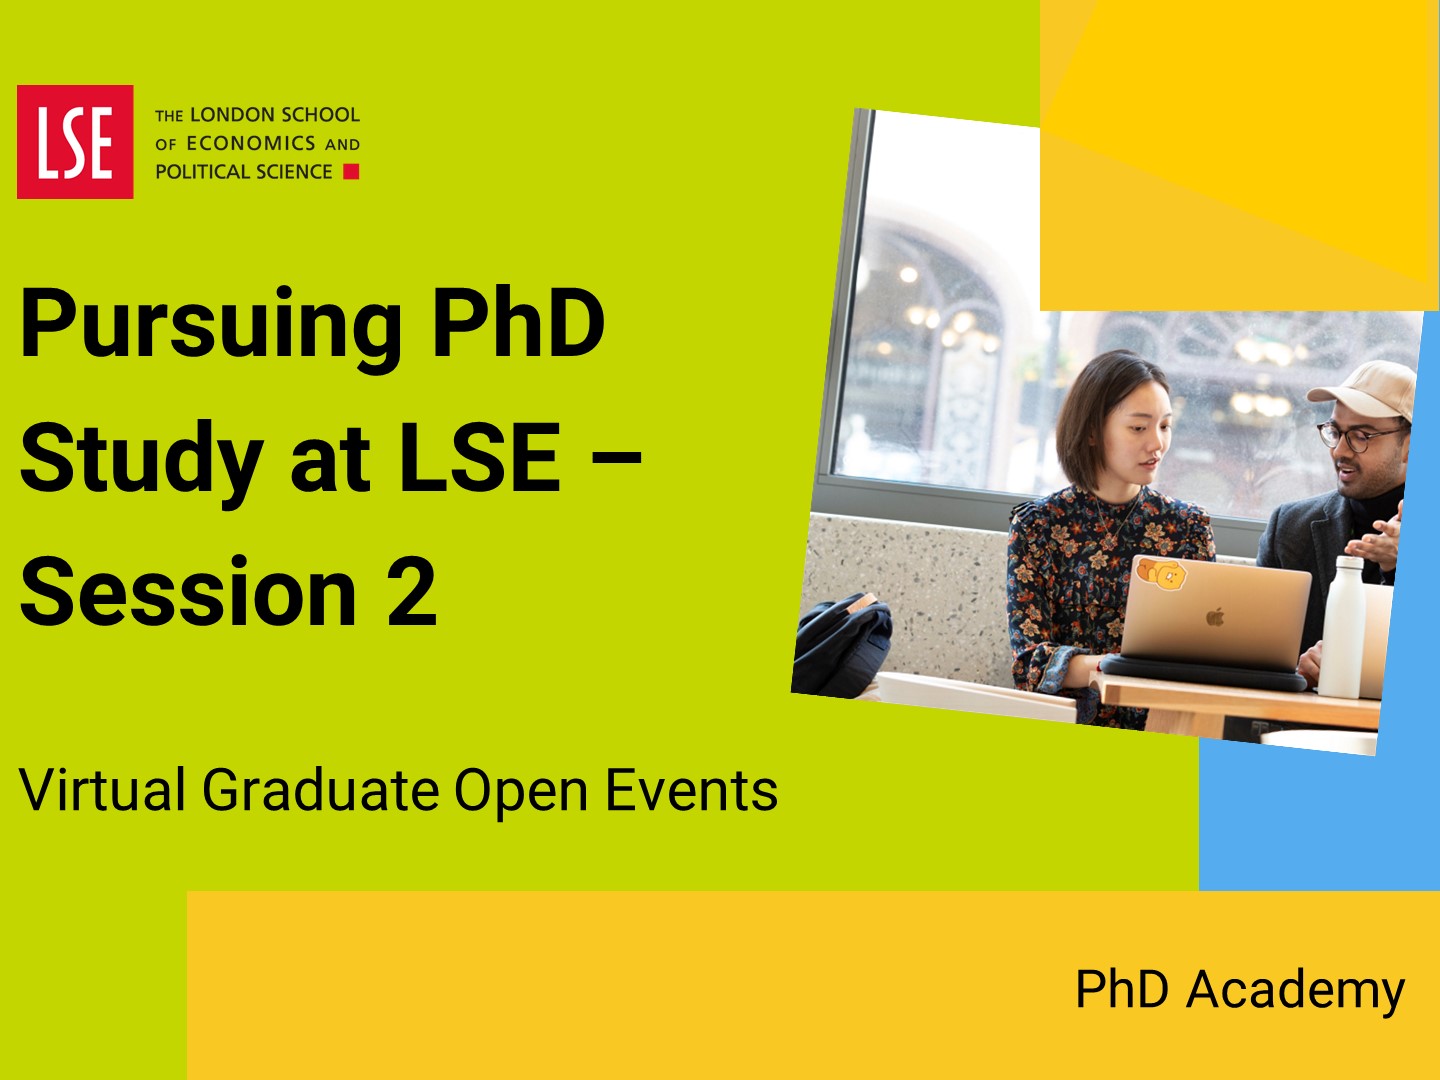 Pursuing PhD study at LSE Session 2